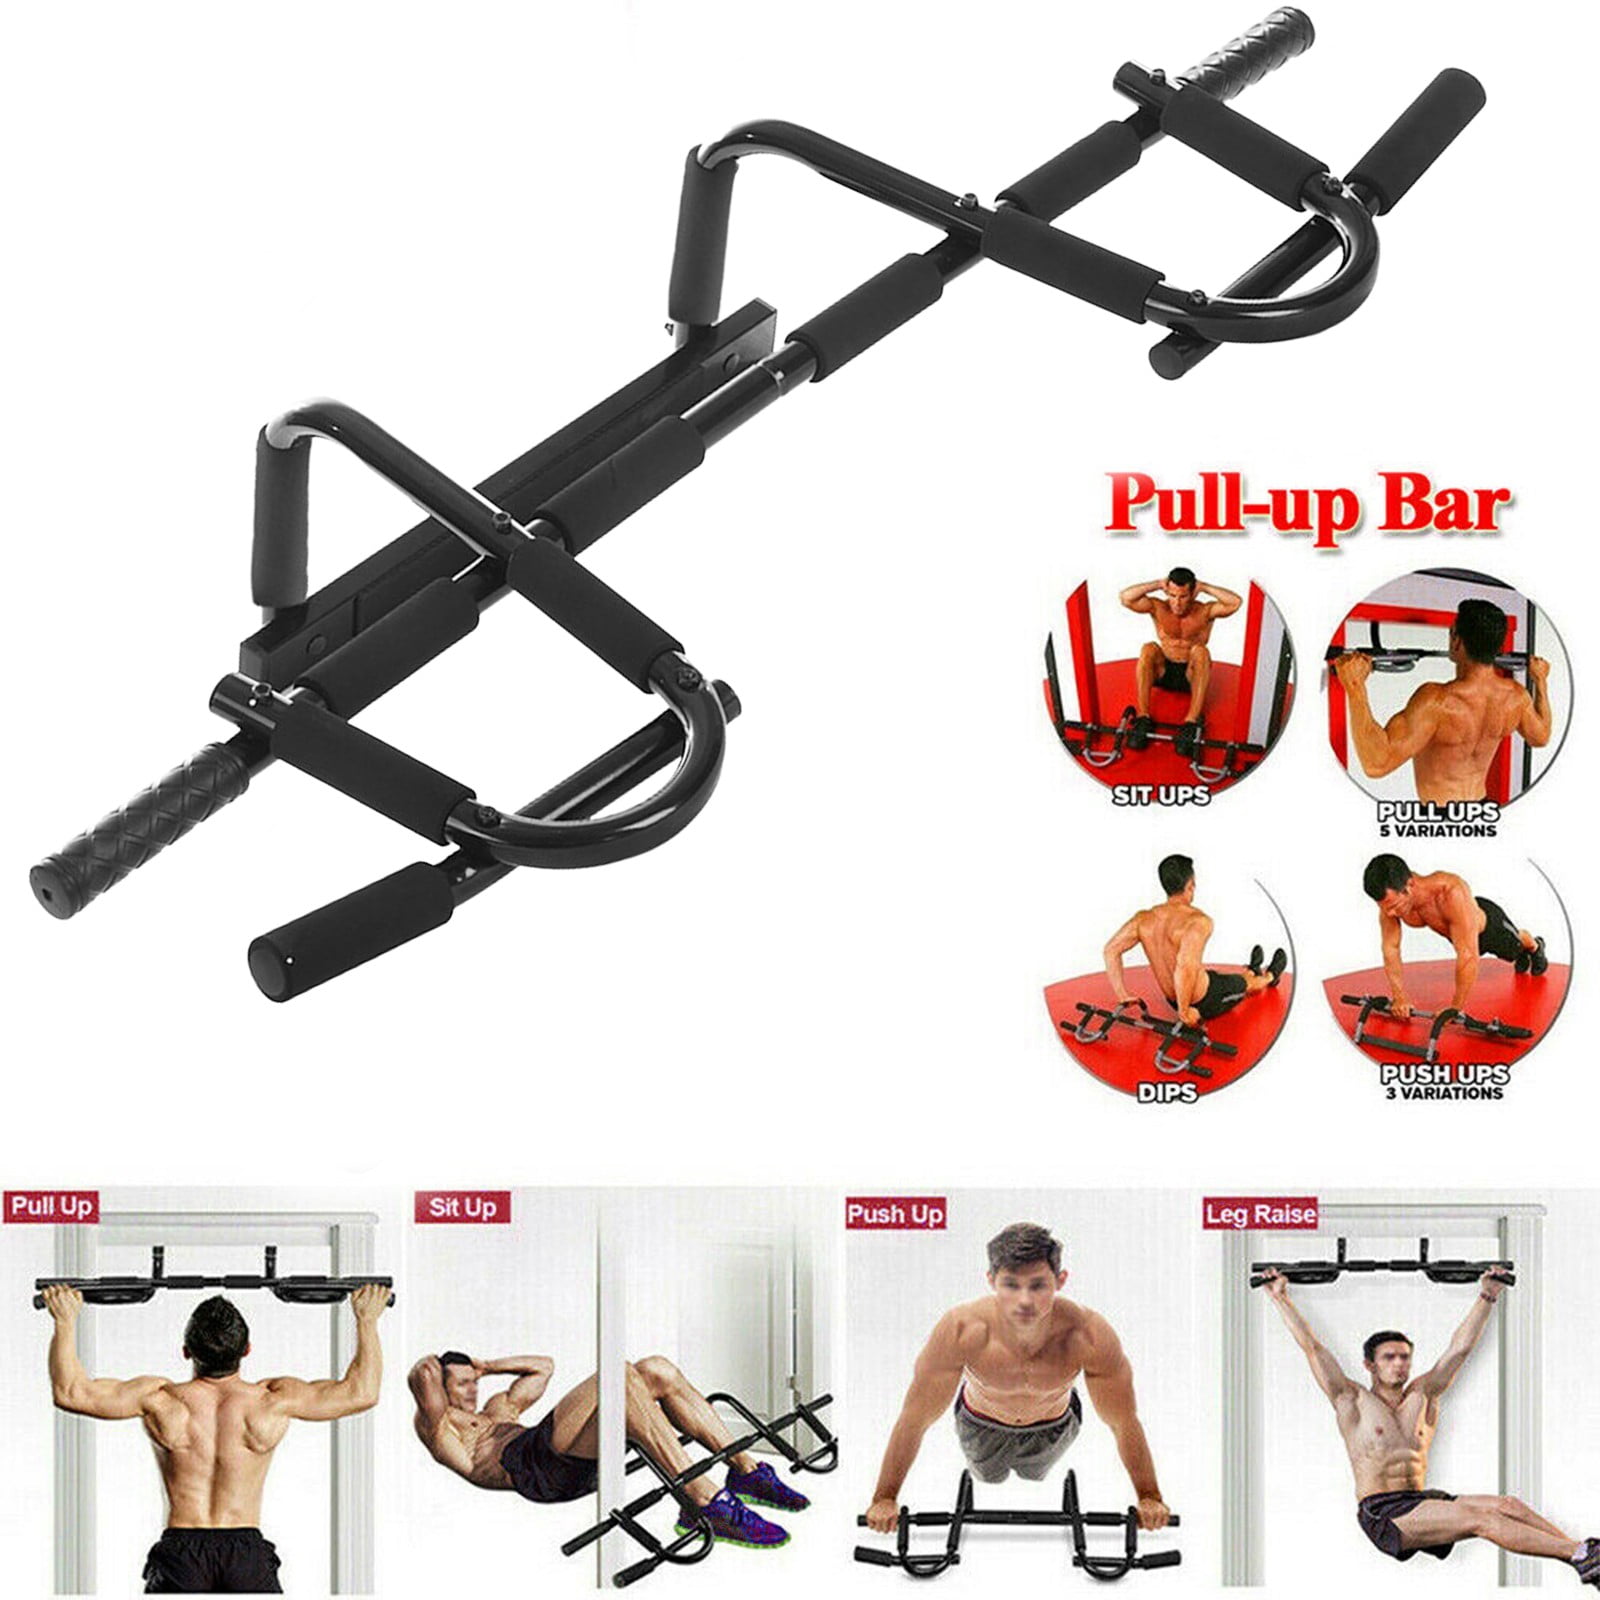 VIFER Chin Up Bar Set Multi Grip Chin Up/Pull Up Bar Heavy Duty Exercise Fitness Gym Home Door Mounted Trainer Plus Accessories Kit